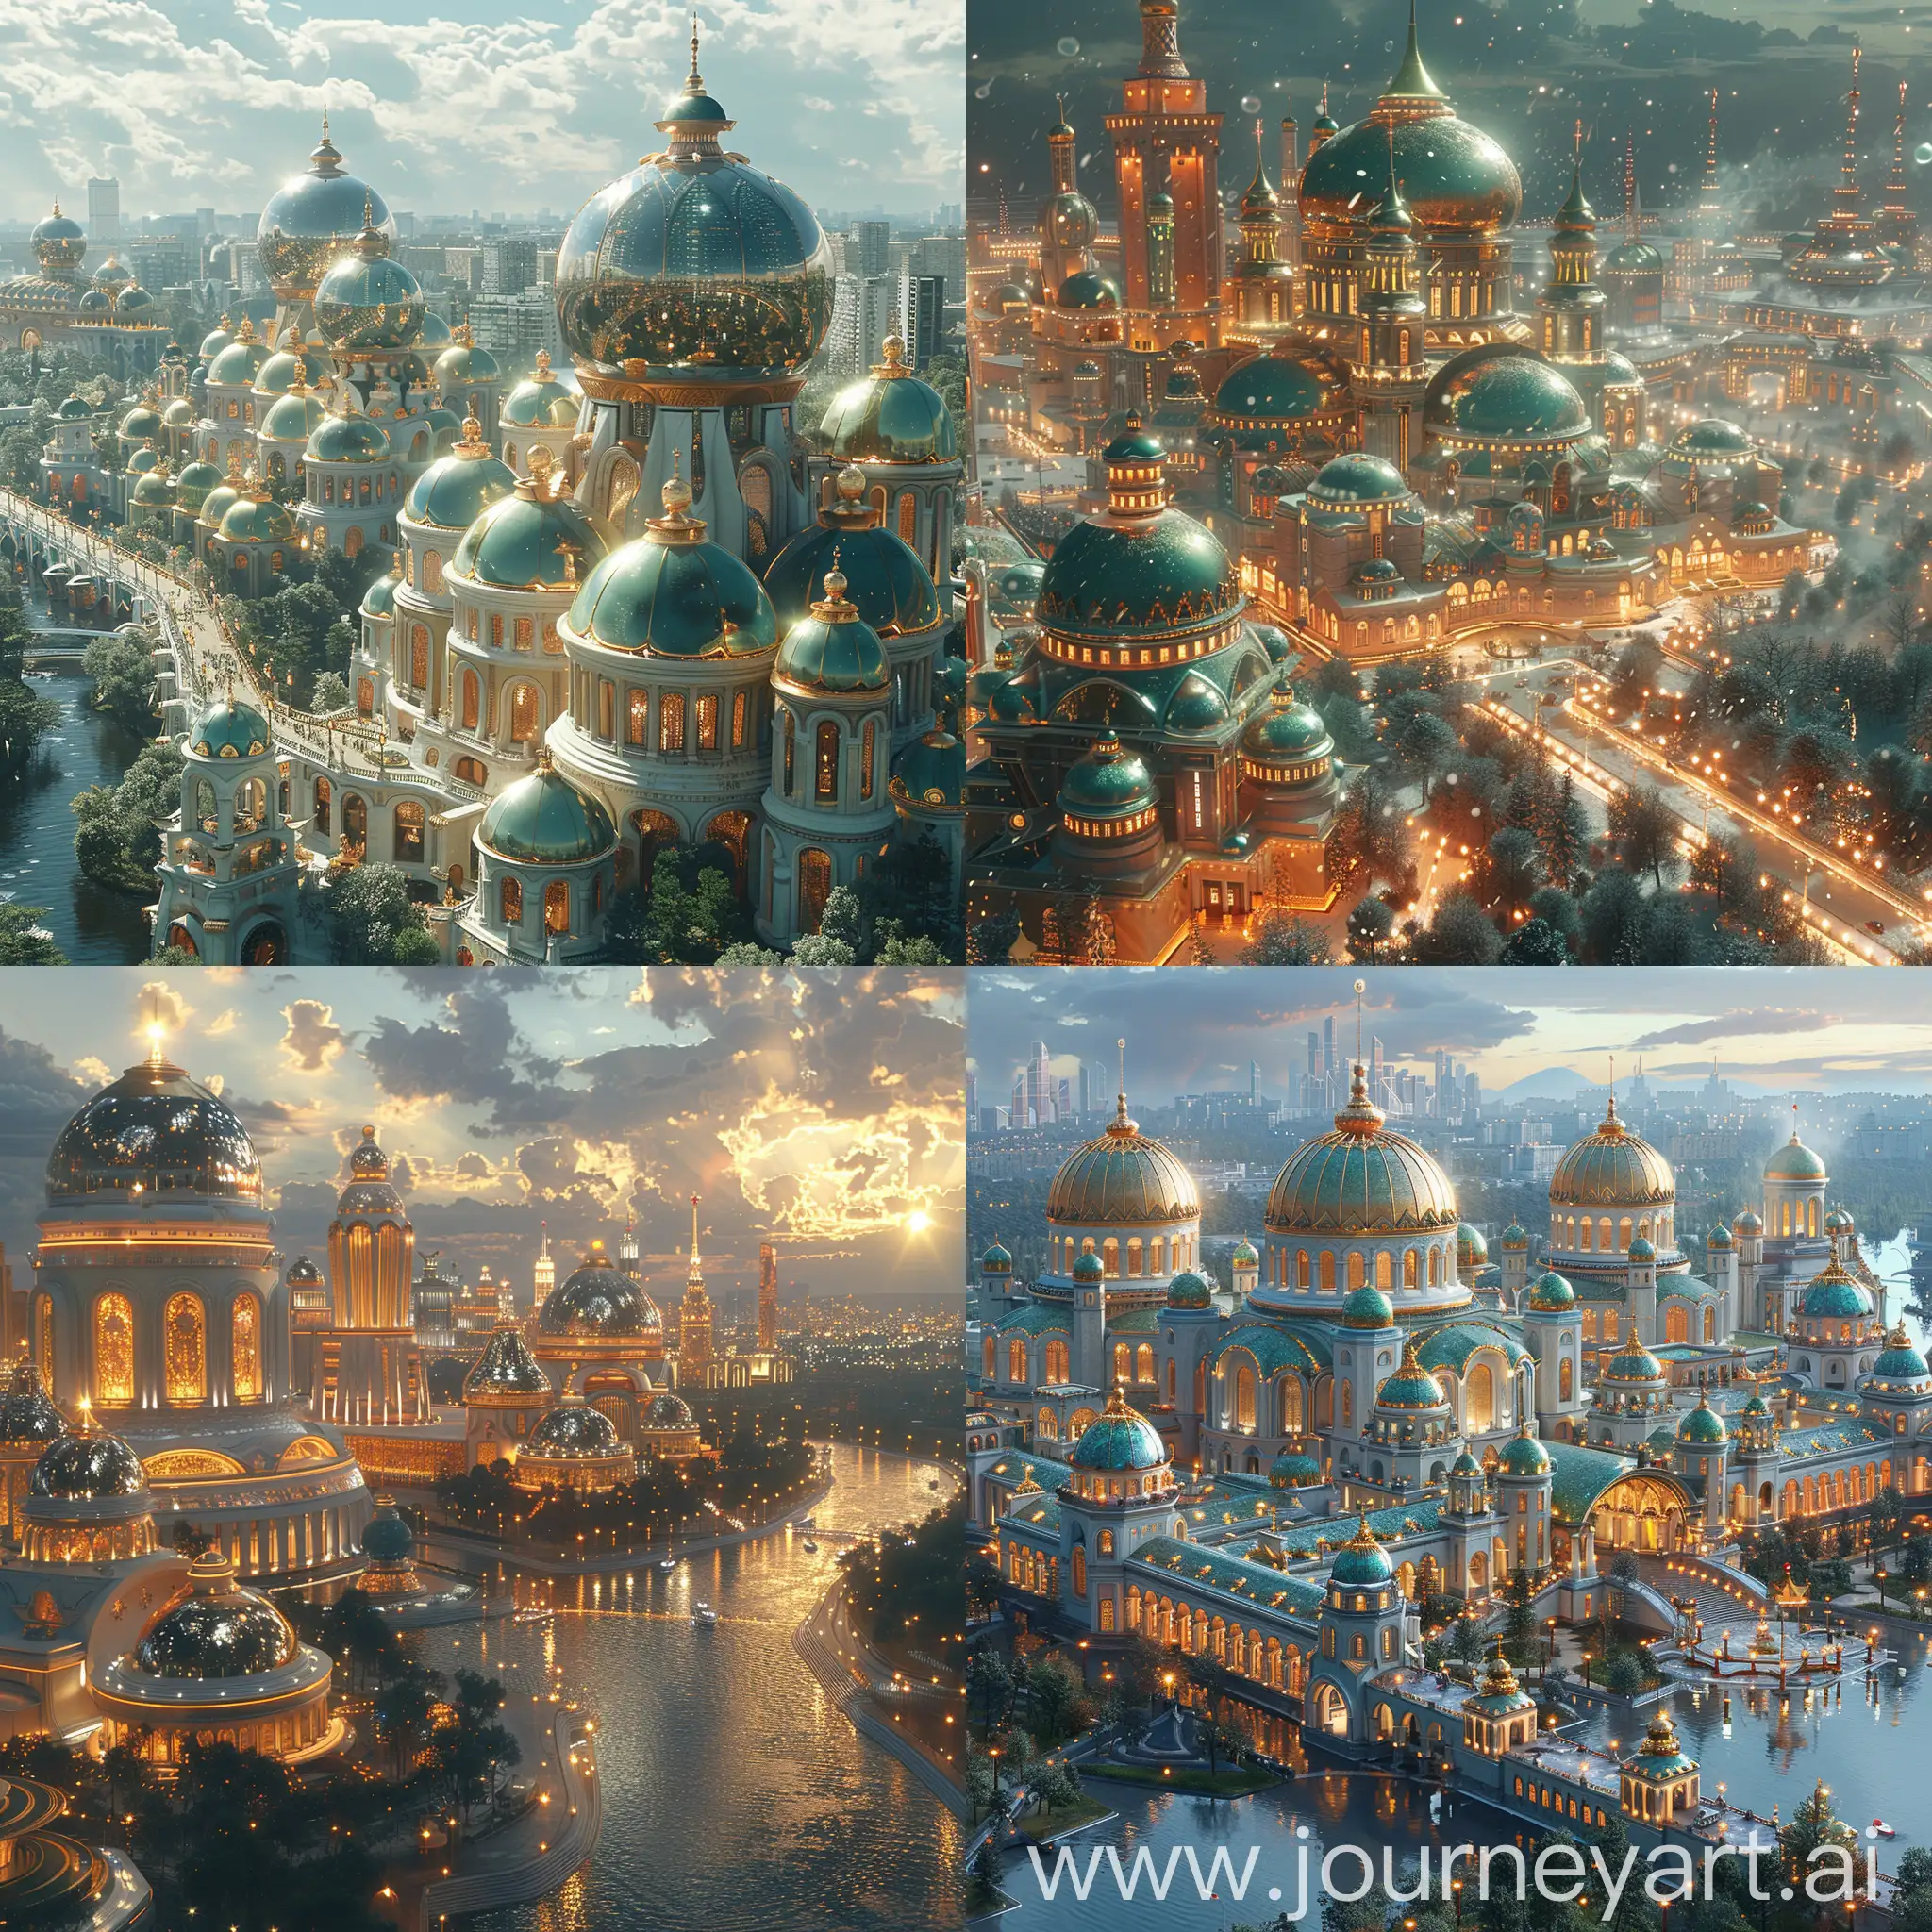 Futuristic-Moscow-Kremlin-with-UltraModern-Design-and-HighTech-Gadgets